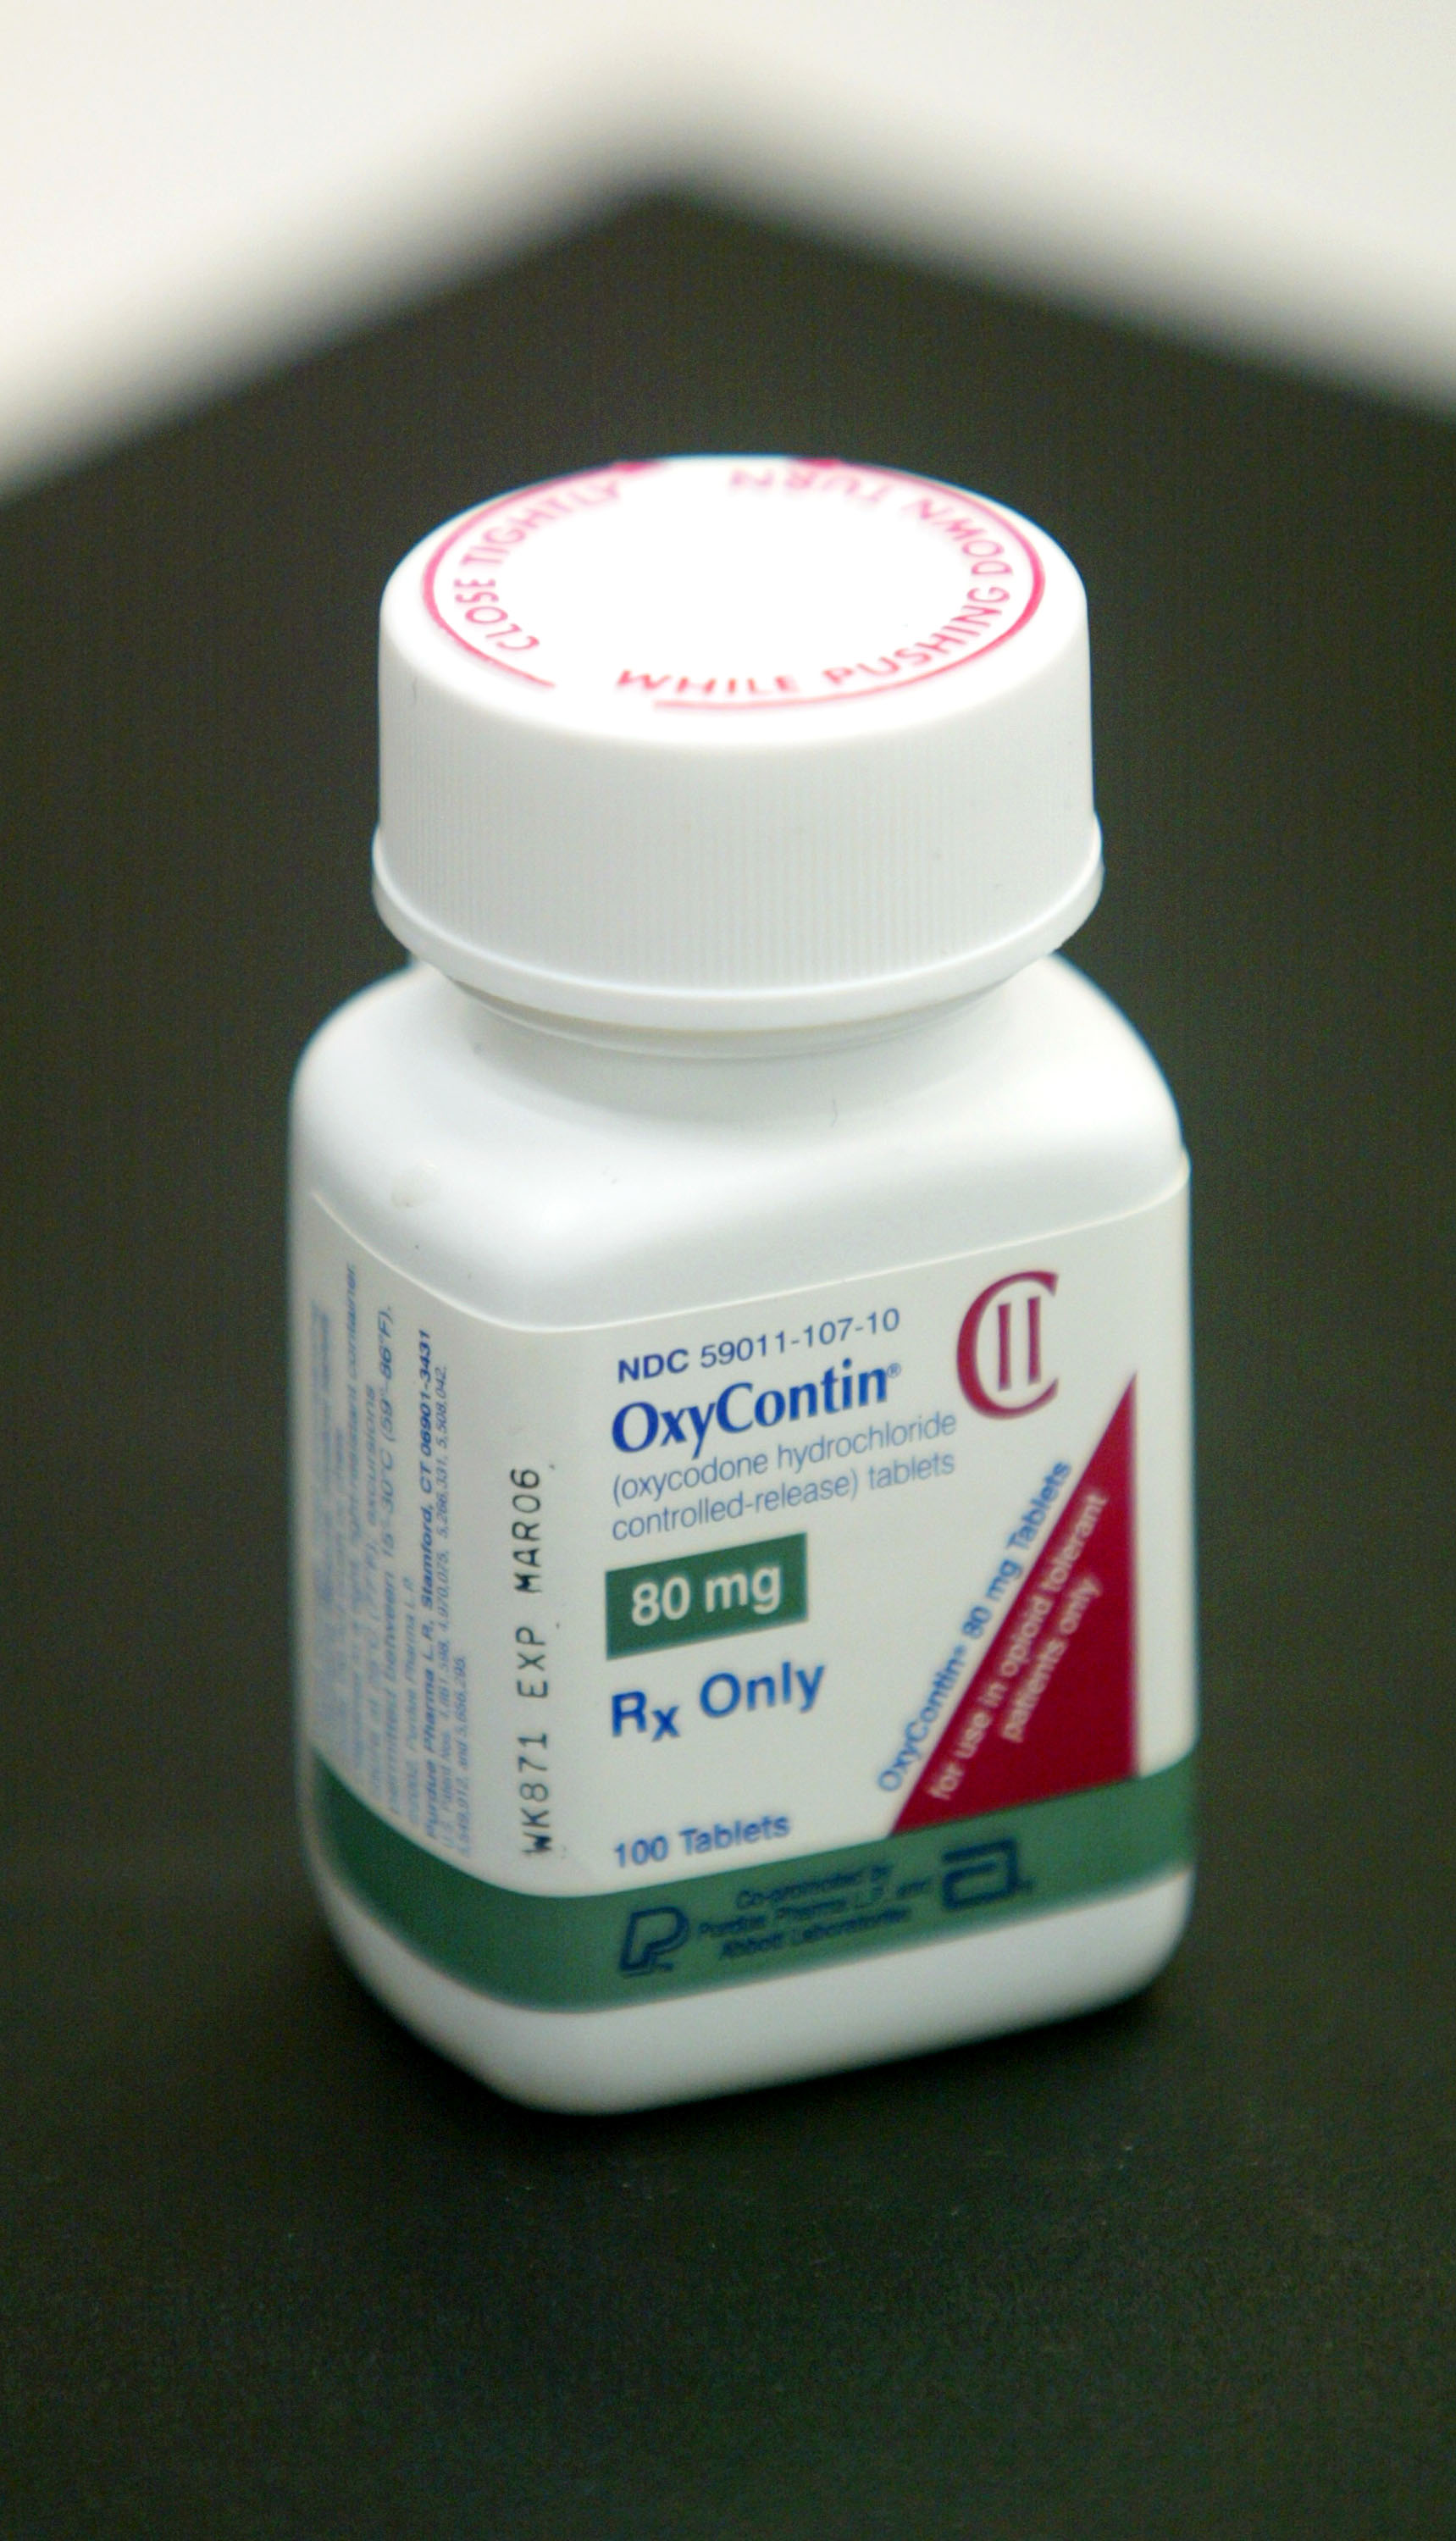 A bottle of OxyContin.